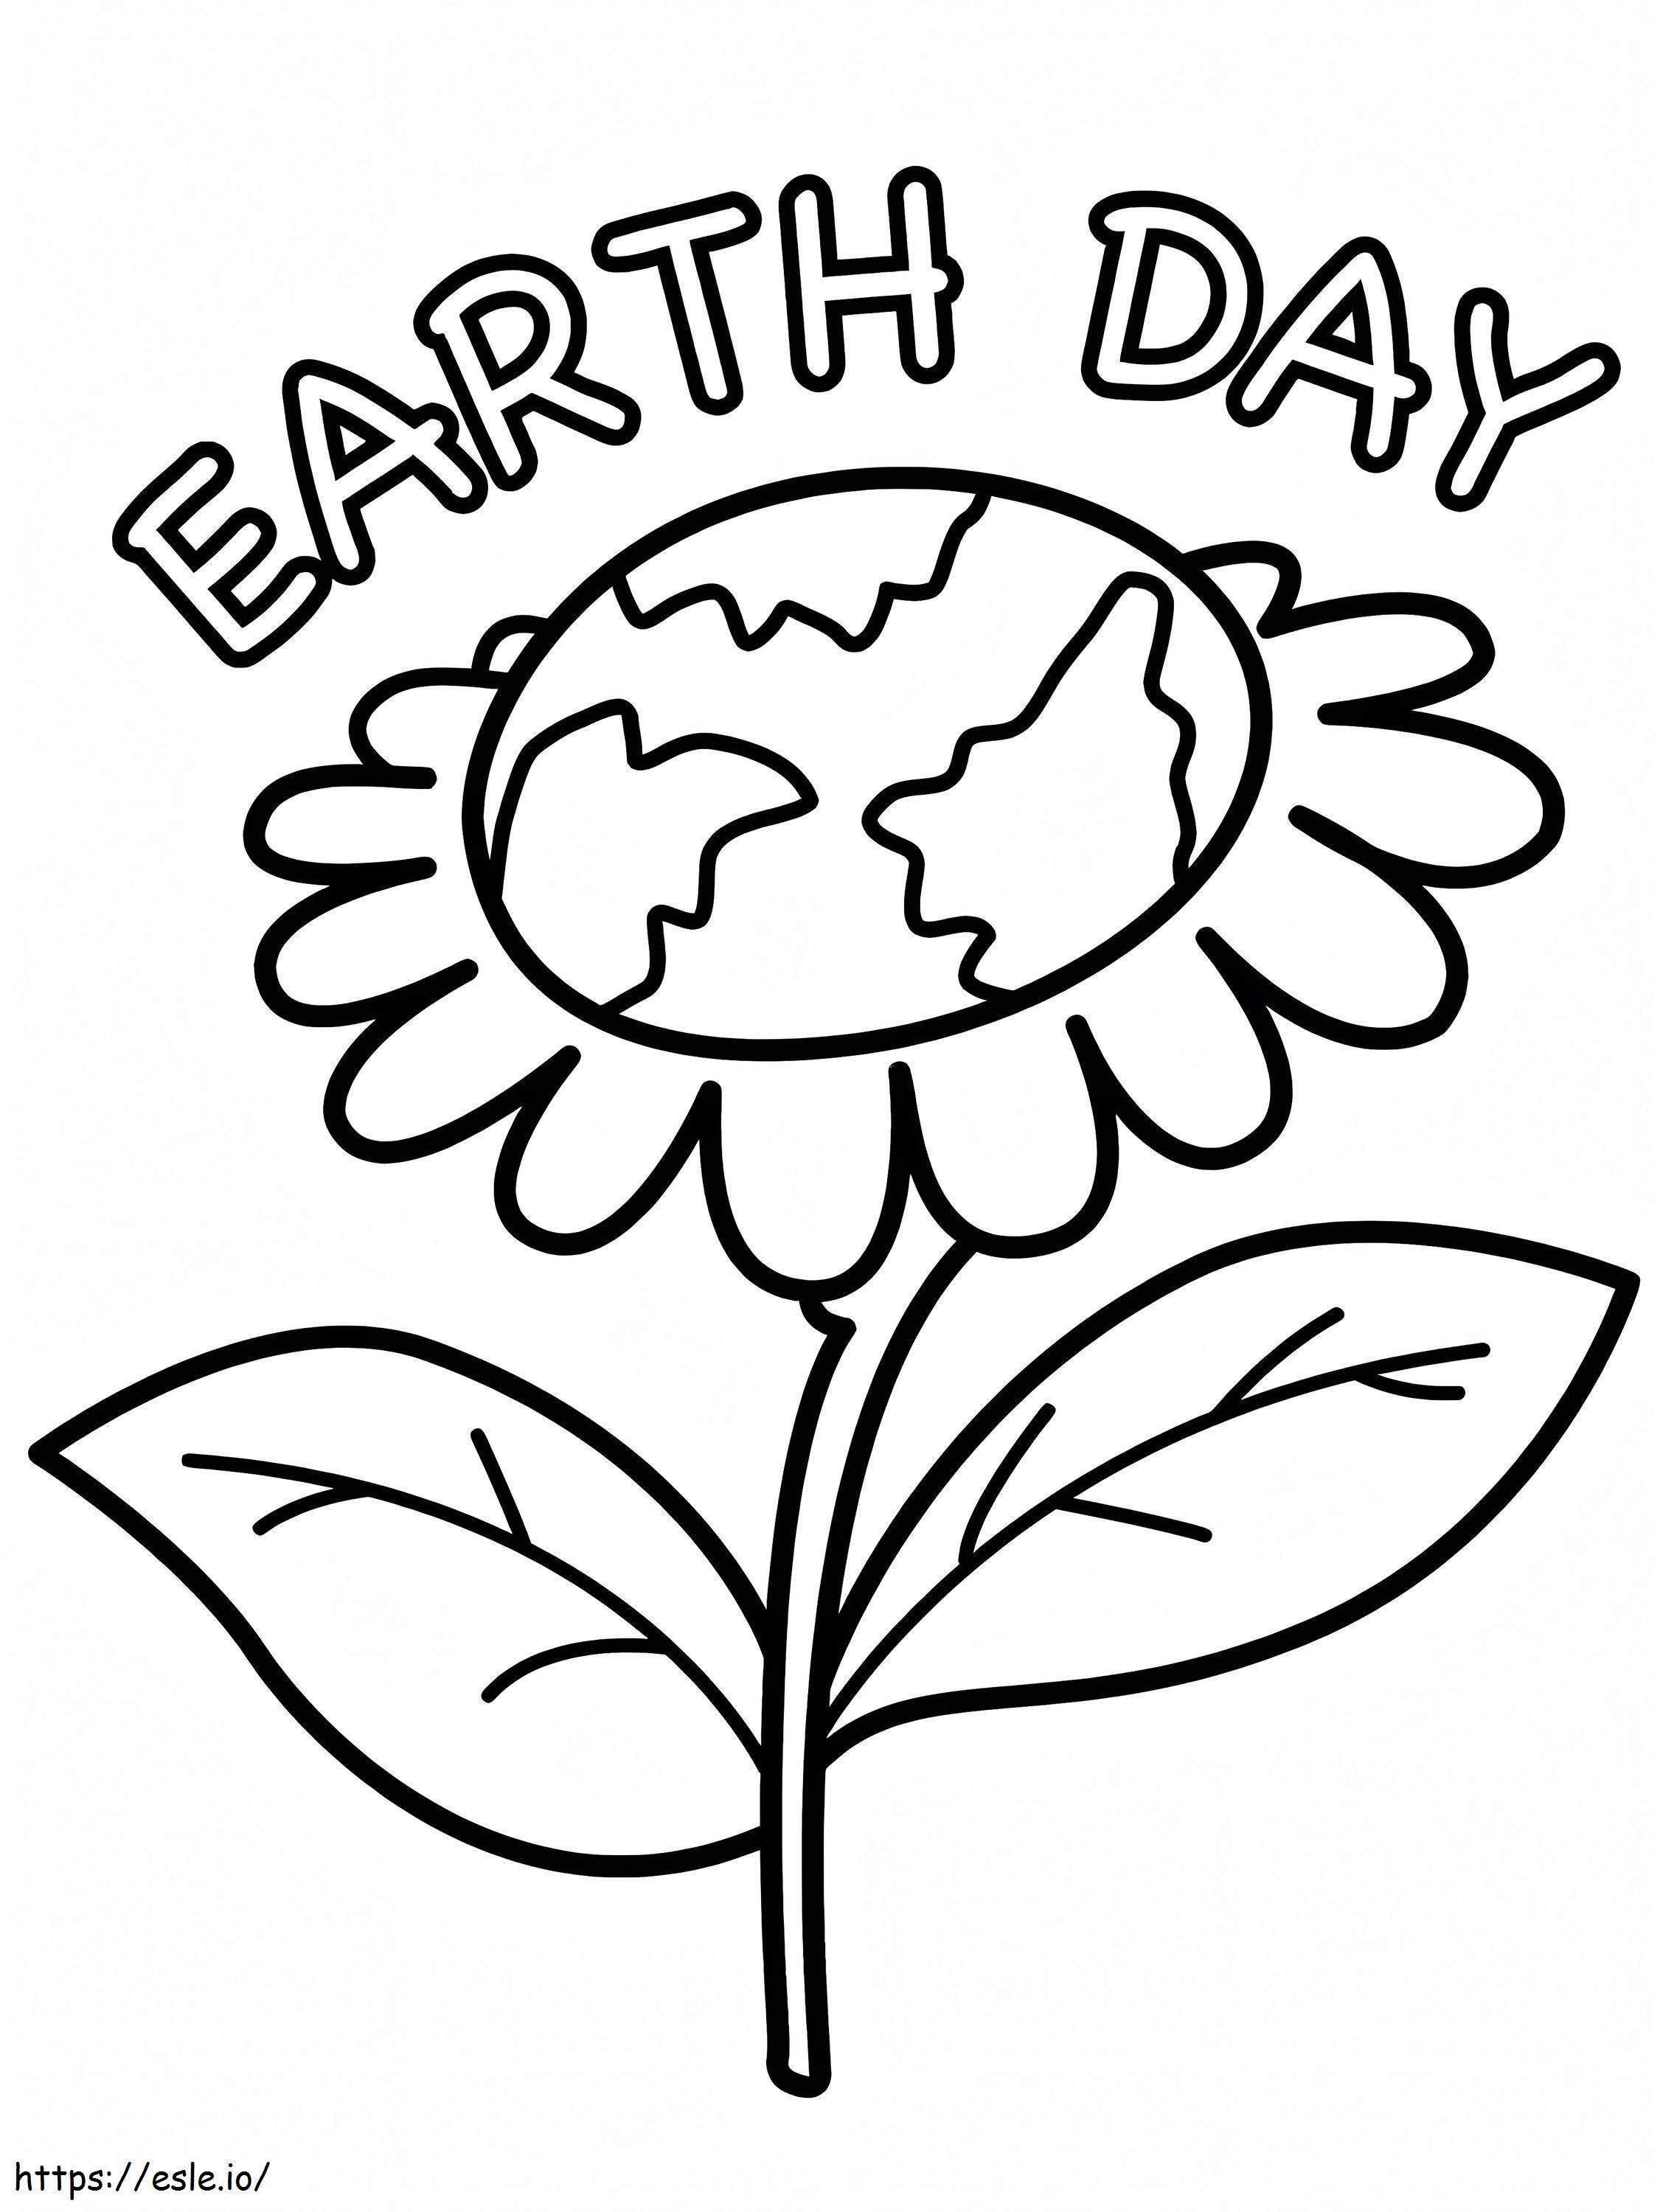 Our Green Earth coloring page